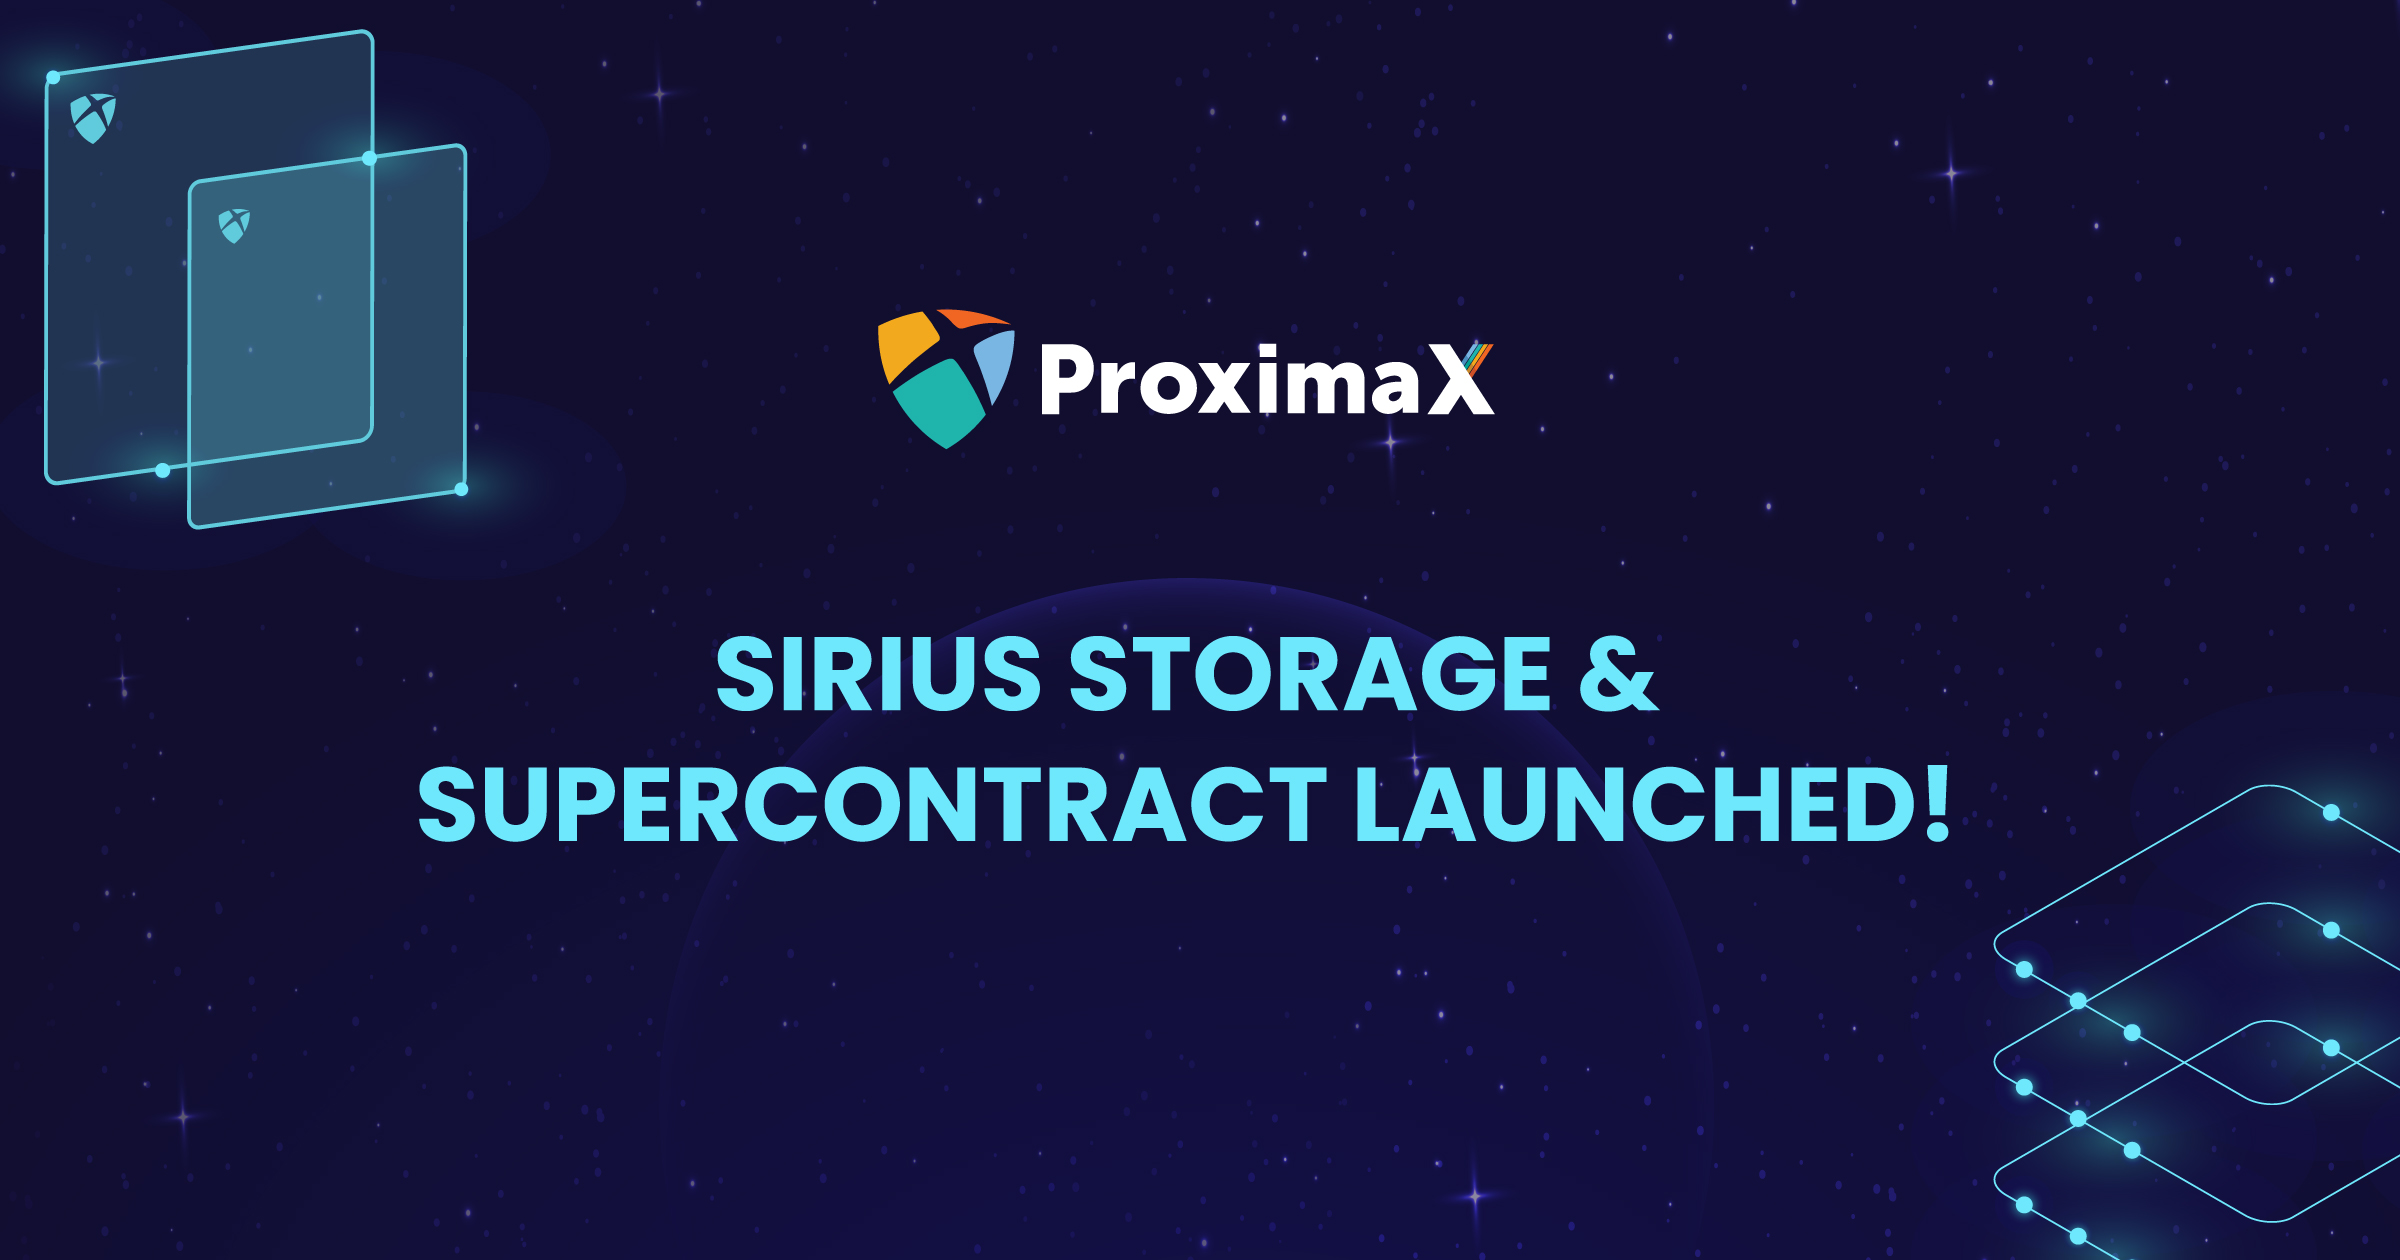 ProximaX Sirius Storage & Supercontract has Launched